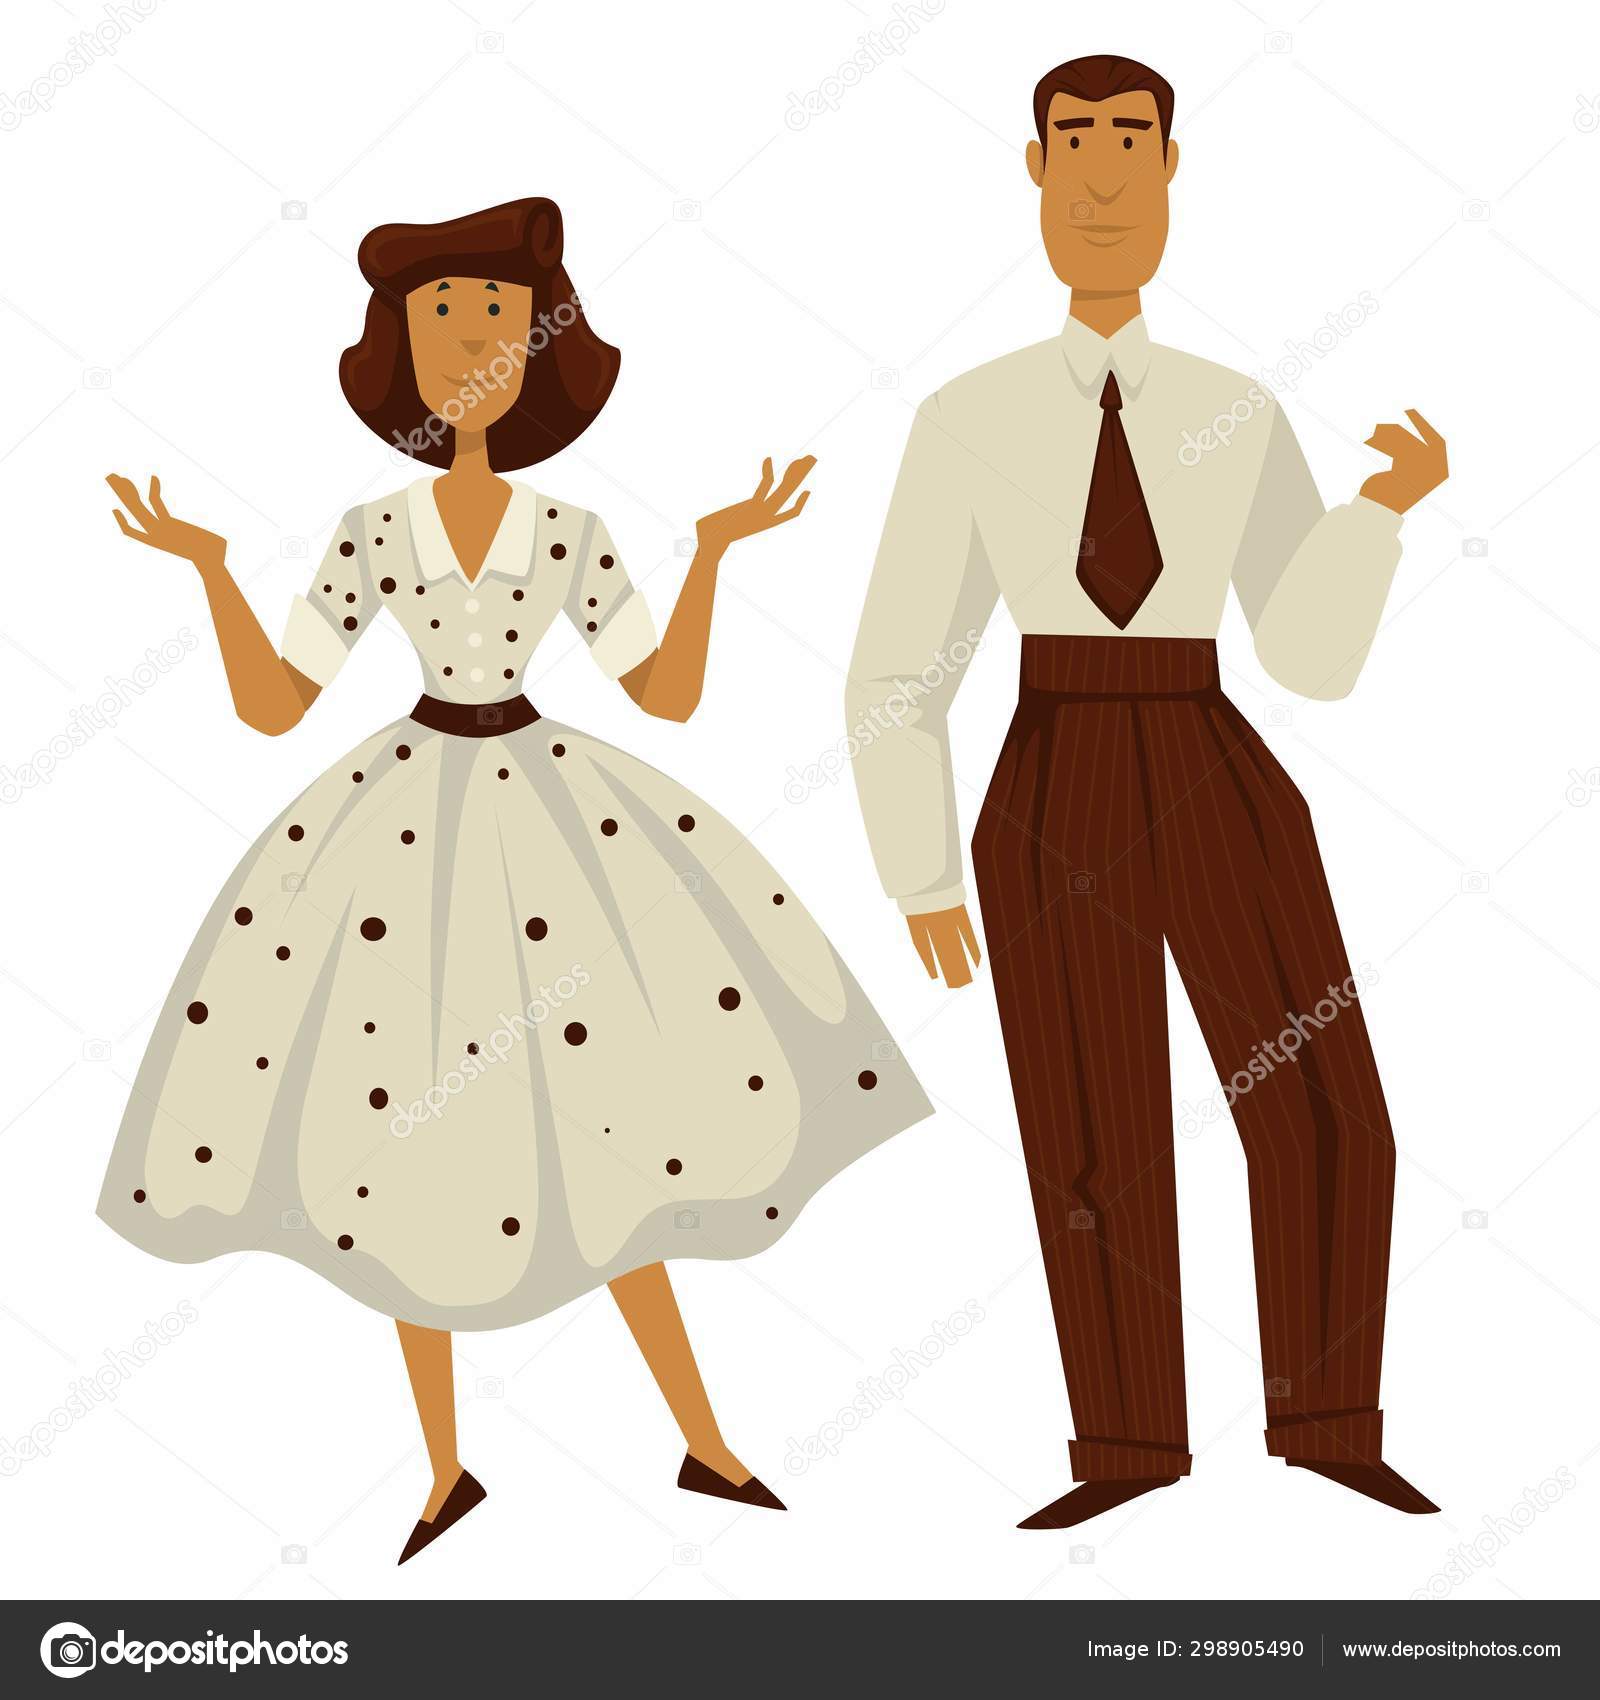 Man and woman in vintage 1950s style clothes, isolated characters